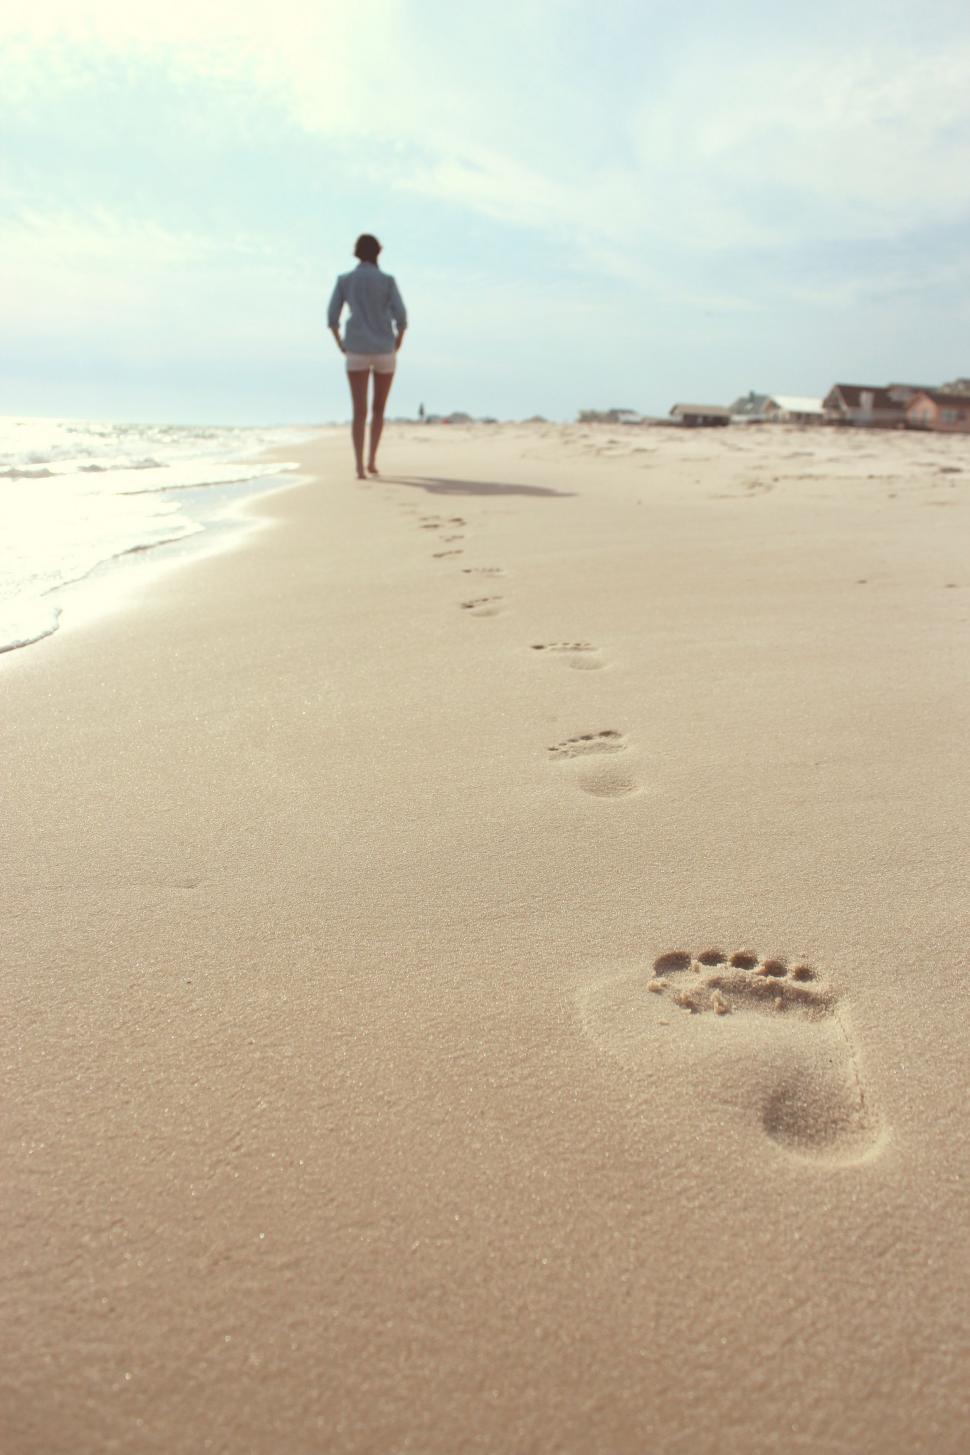 Free Image of Person Walking on Beach With Footprints in Sand 